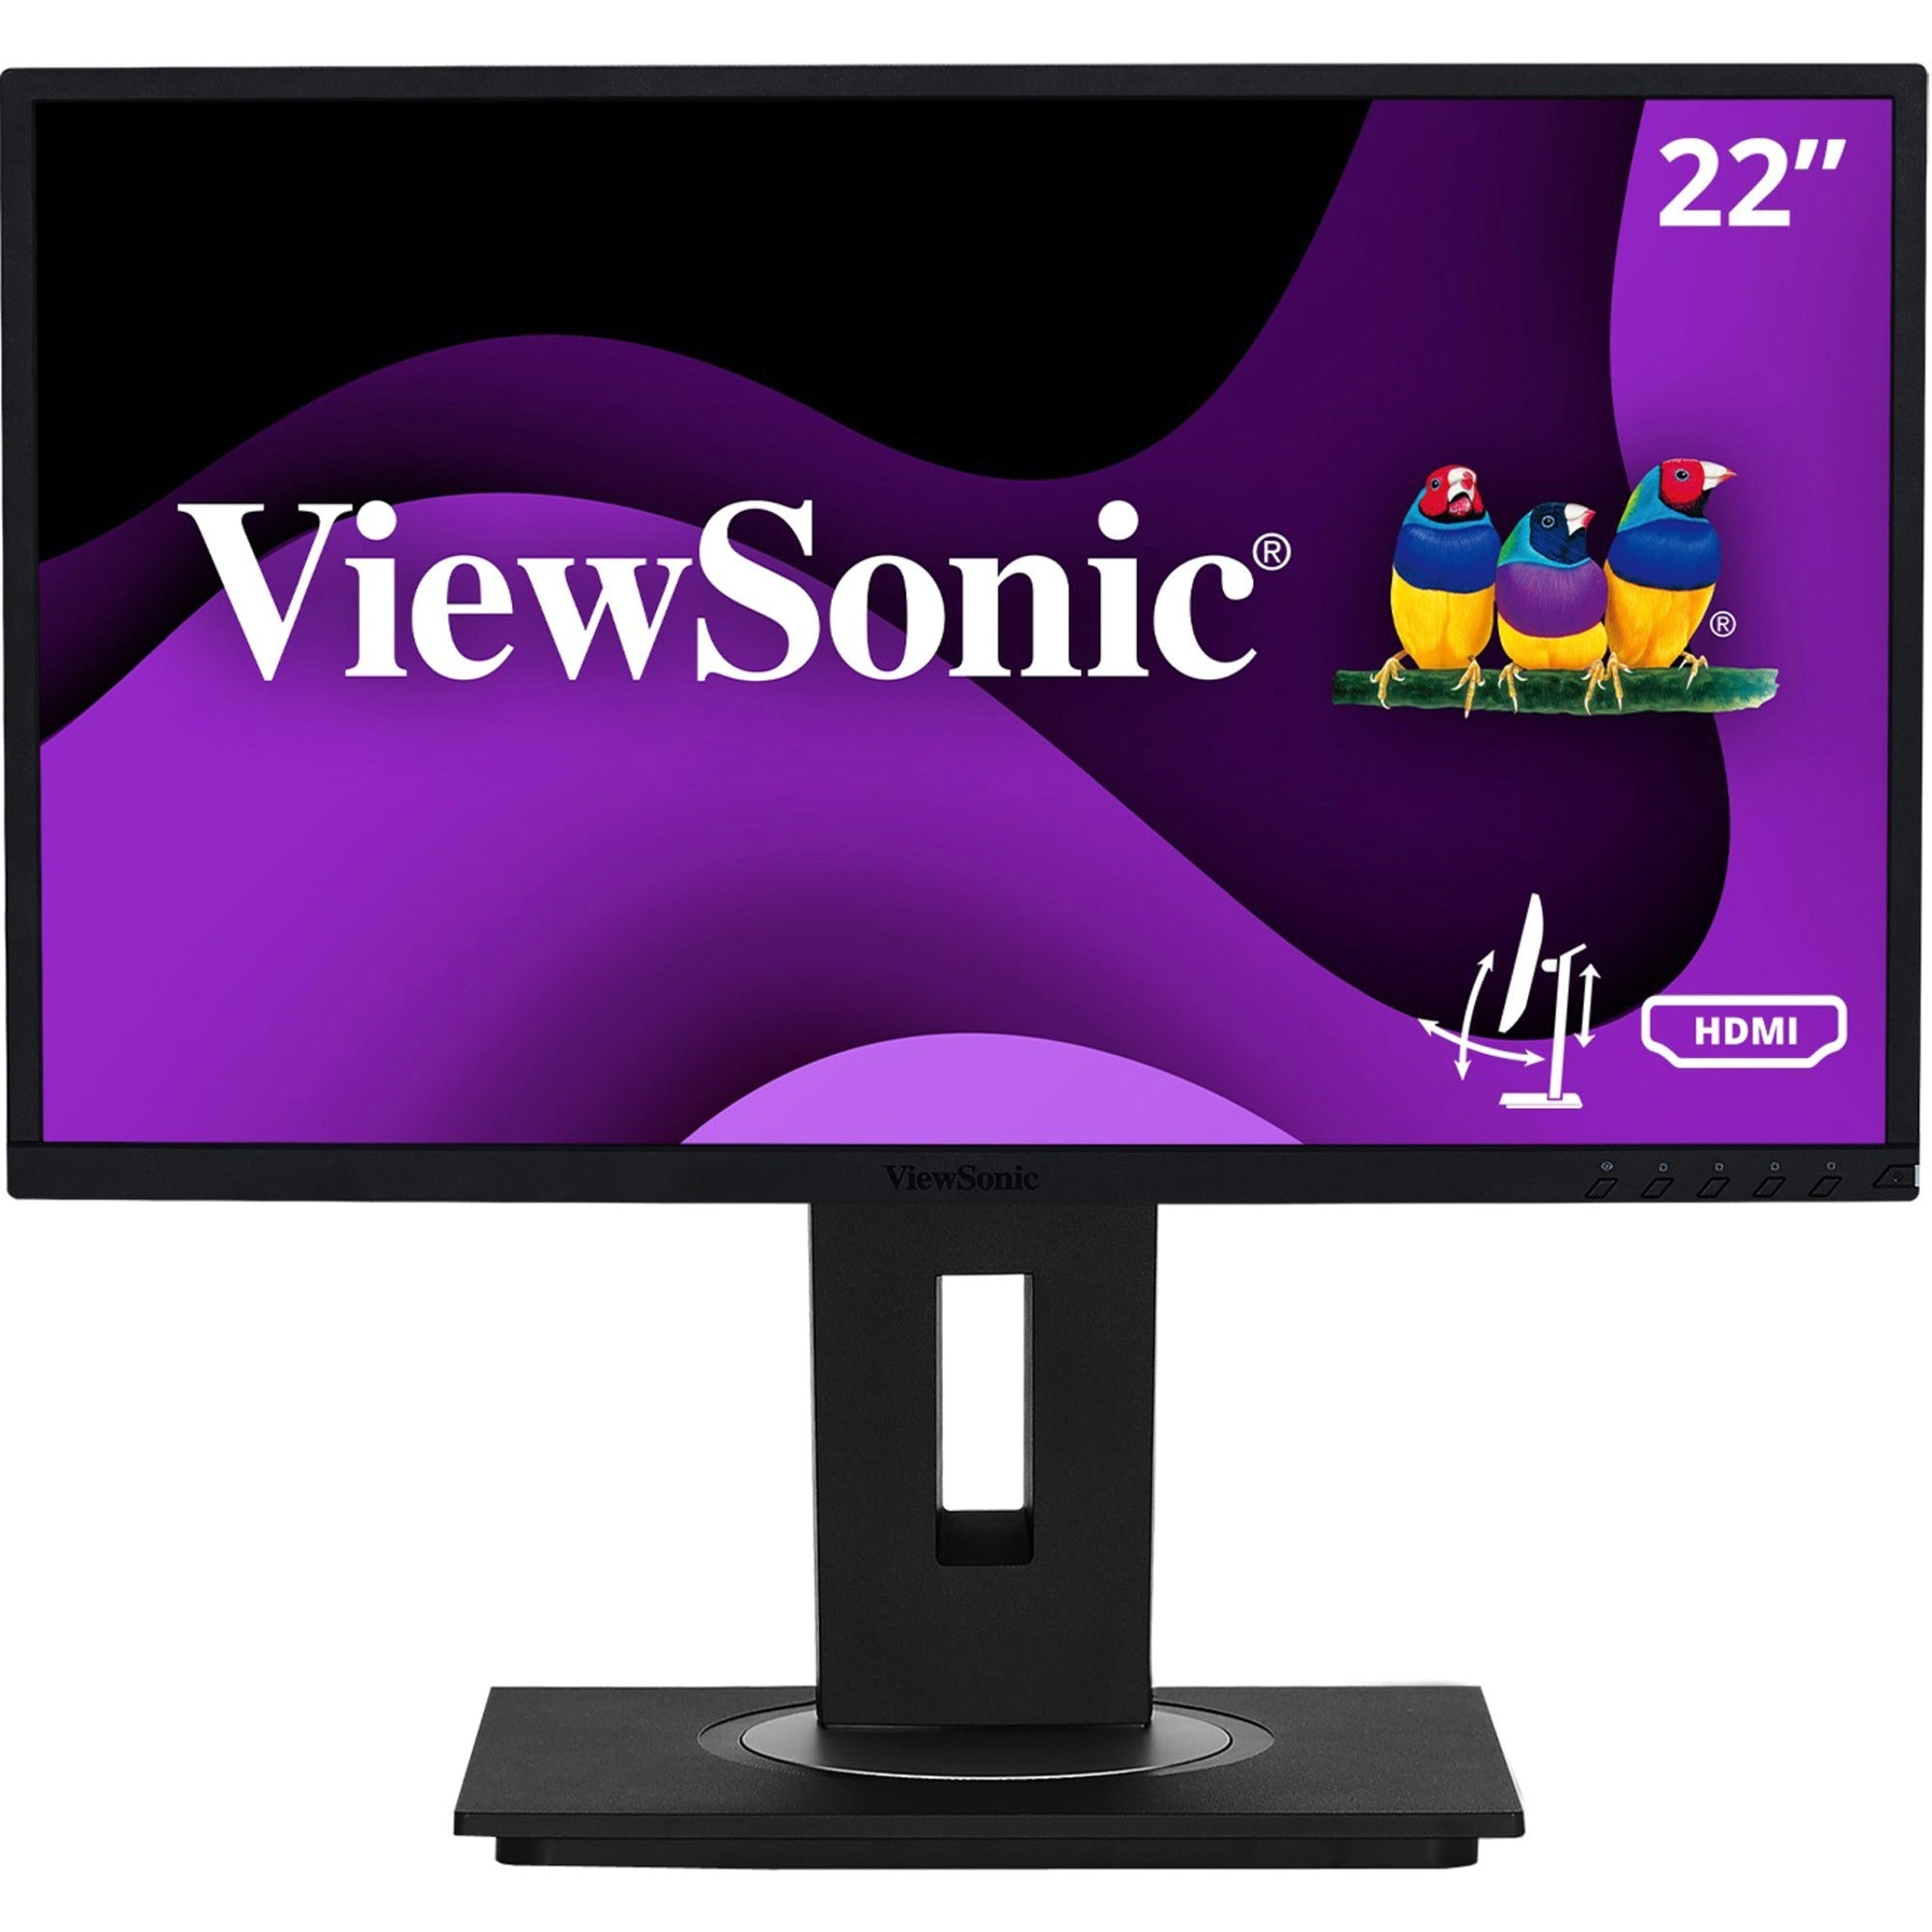 viewsonic-vg2248-22-inch-ips-1080p-ergonomic-monitor-with-hdmi-displayport-usb-and-40-degree-tilt-for-home-and-office-ergonomic-vg2248-1080p-ips-monitor-with-hdmi-displayport-usb-and-40-degree-tilt-250-cd-m2-22_vewvg2248 - 1